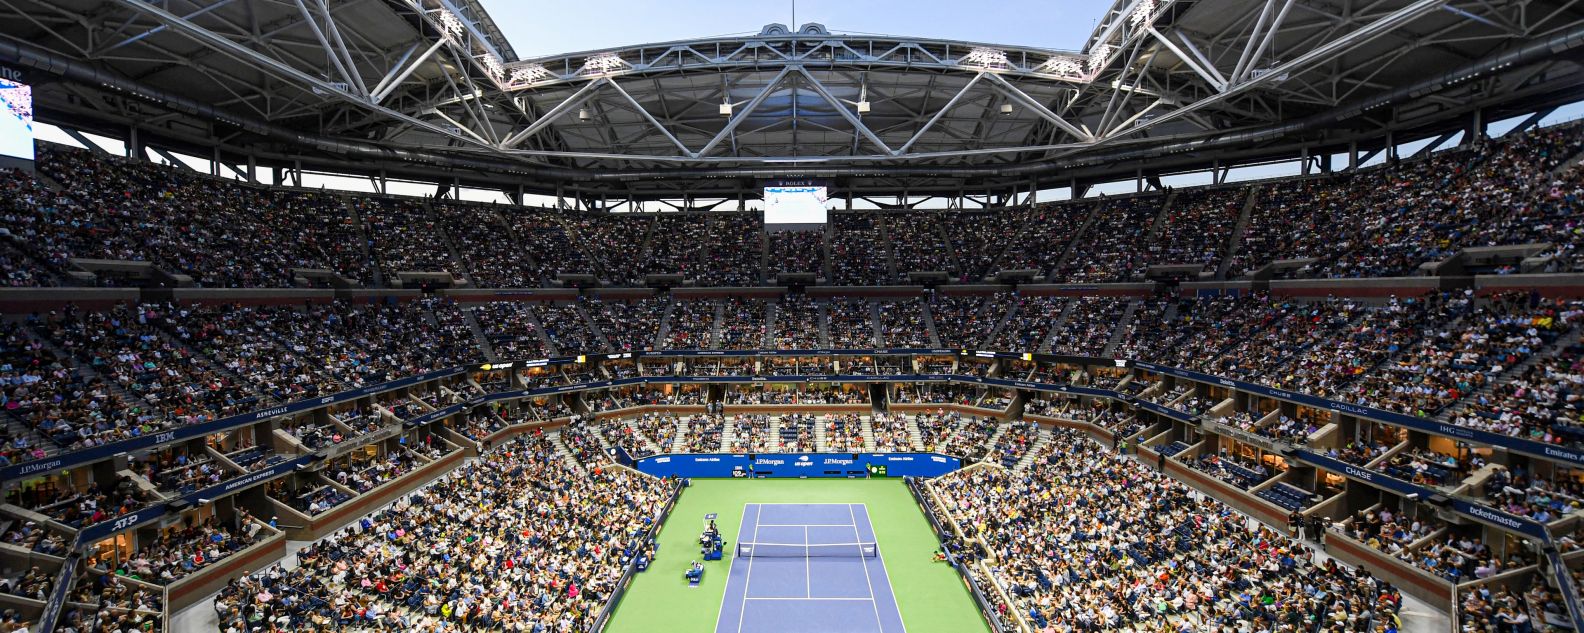 Distance shot of the US Open Tennis Arena